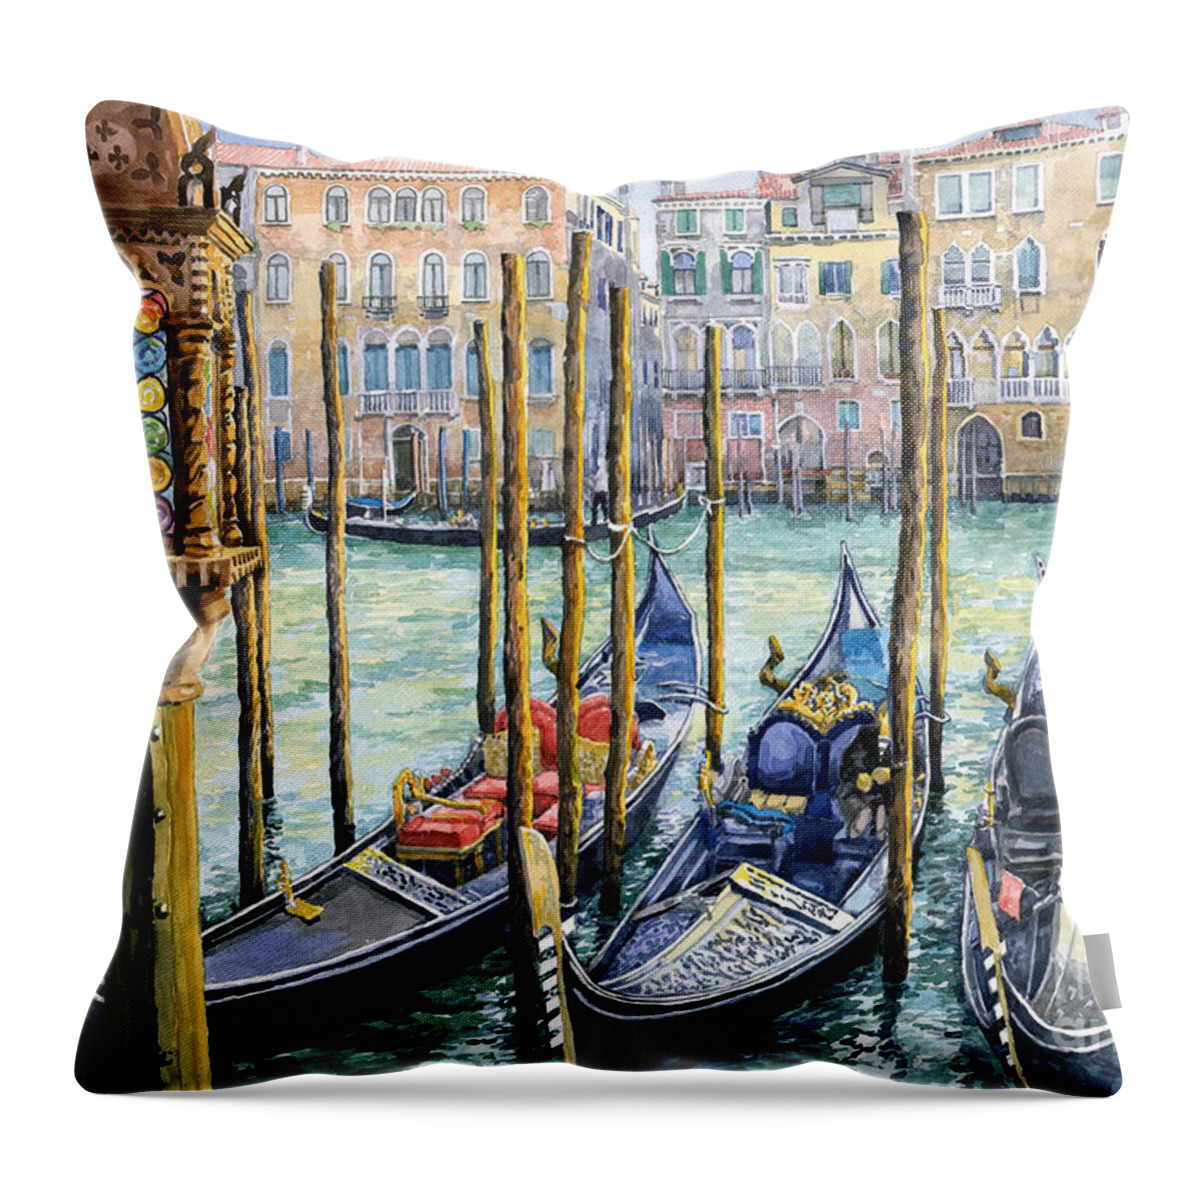 Watercolor Throw Pillow featuring the painting Italy Venice Lamp by Yuriy Shevchuk